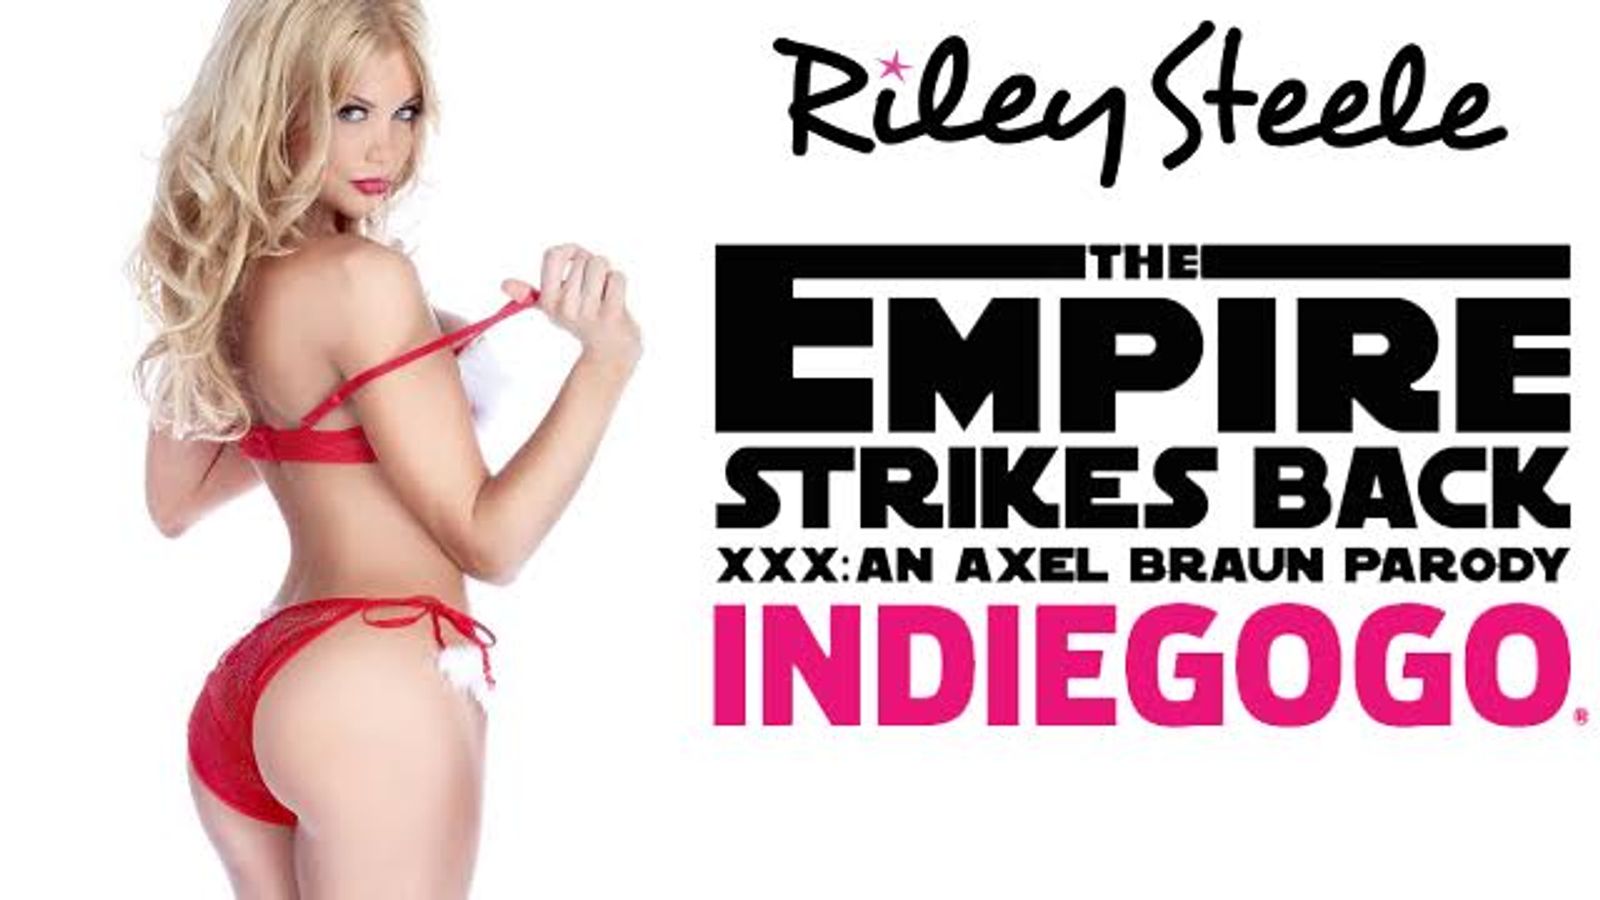 Riley Steele Pledges 1st and Only Anal for 'Empire'